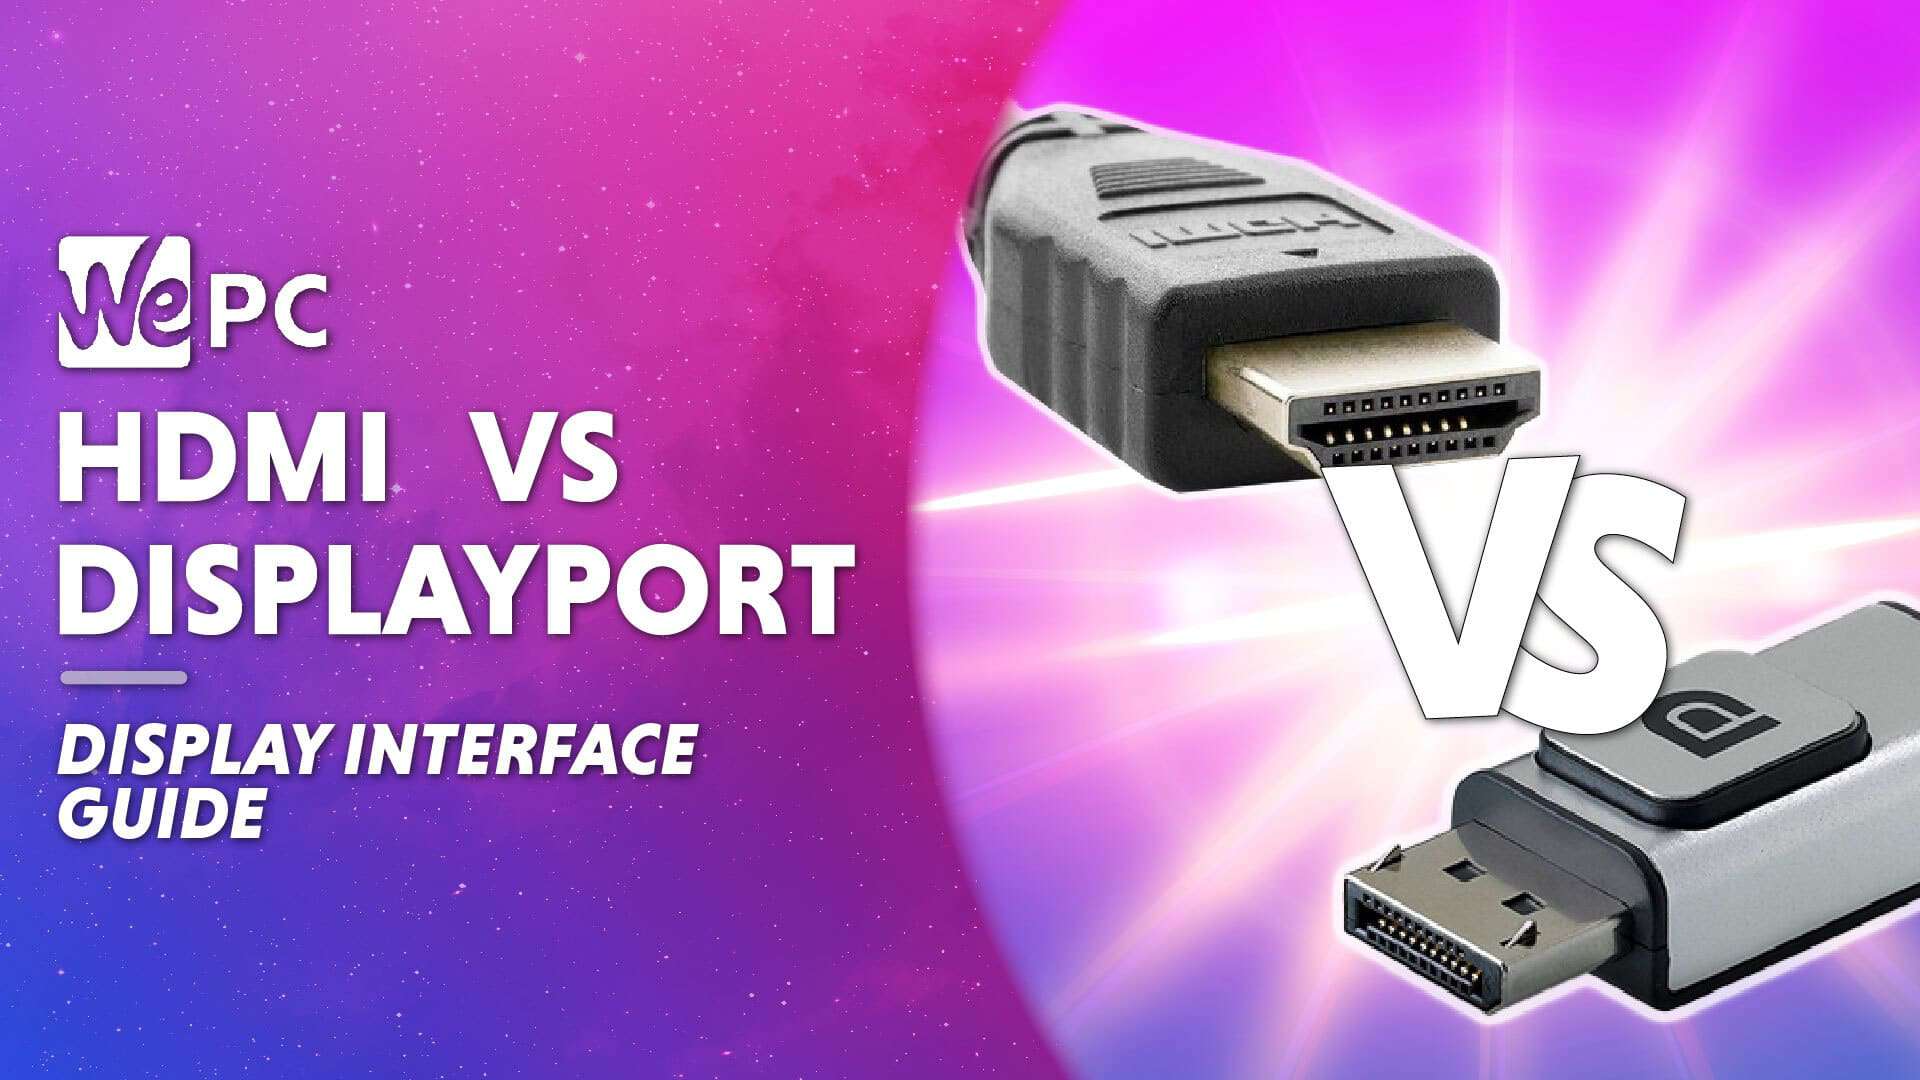 DisplayPort Vs HDMI - which display interface is better? | WePC